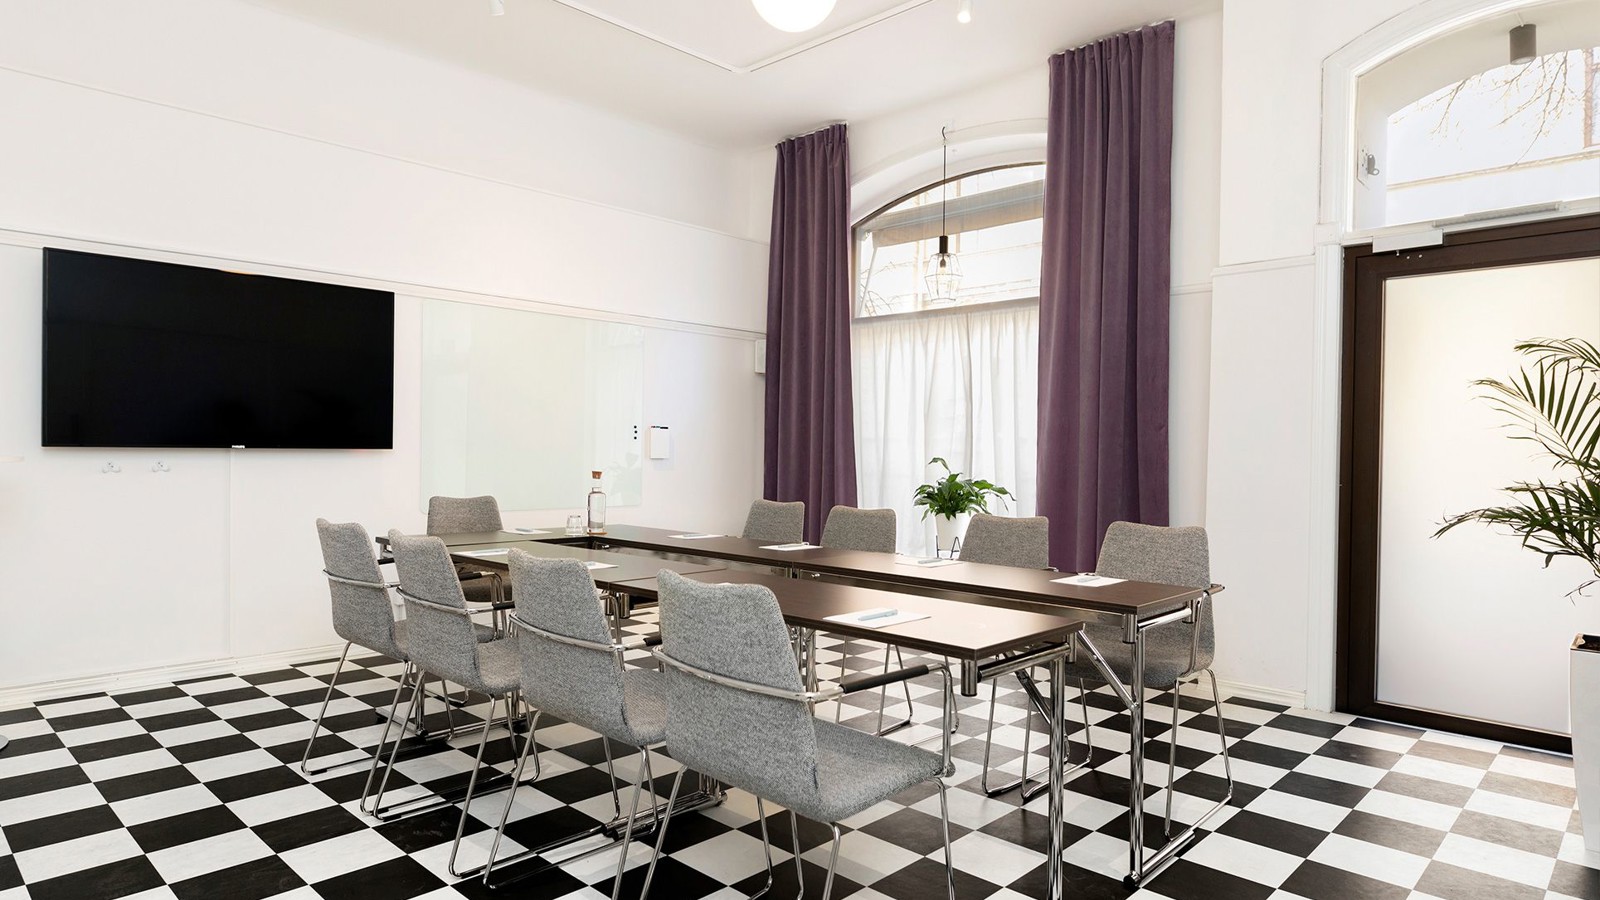 Conference room with checkerboard floor, table and chairs